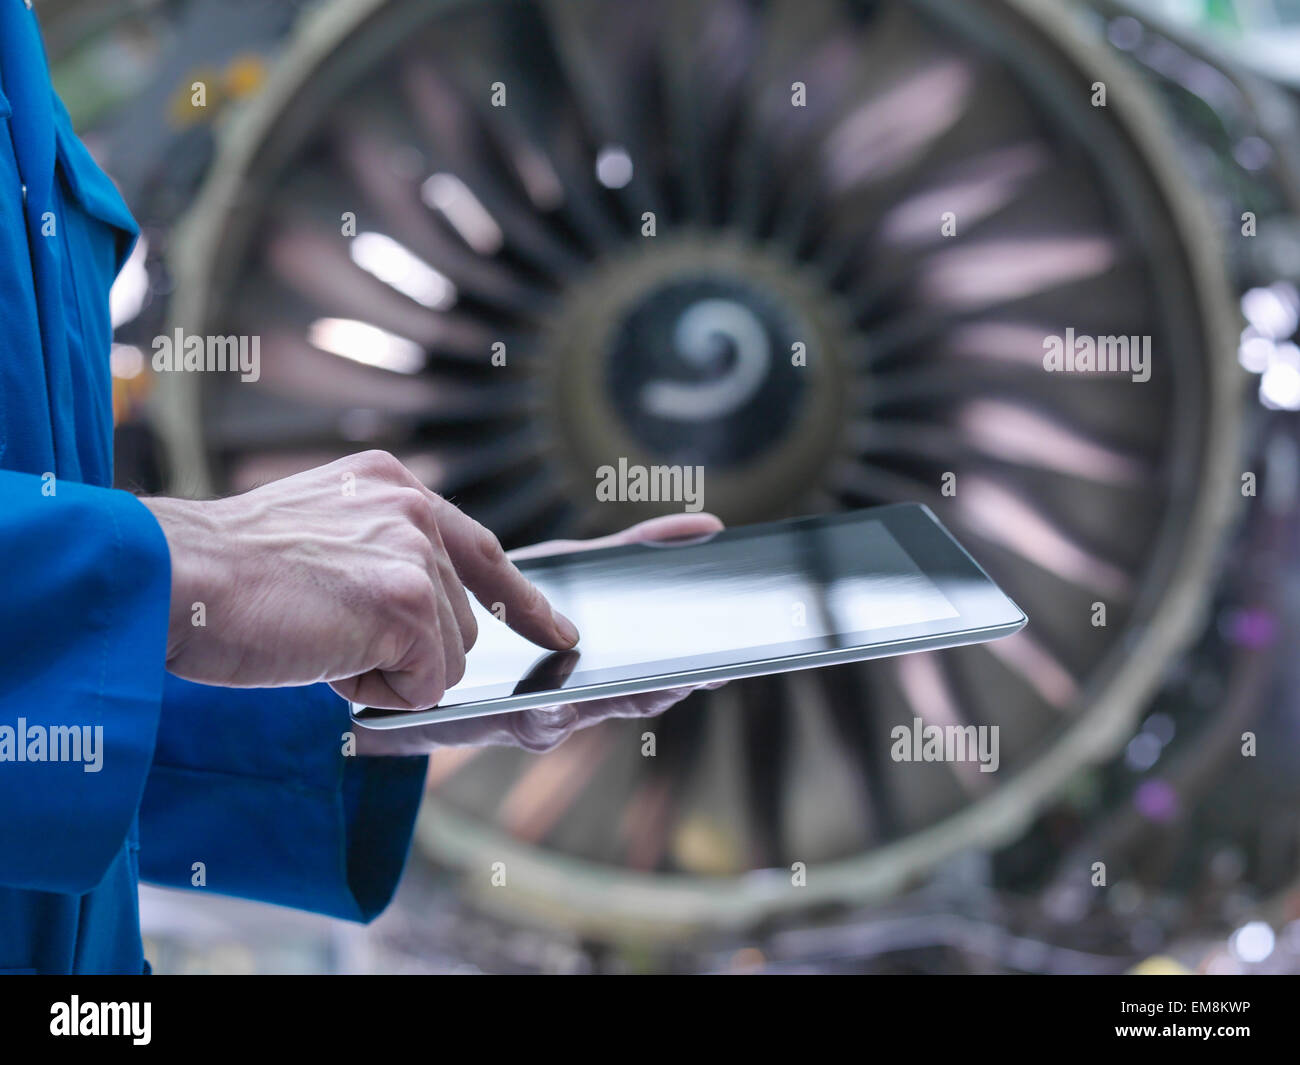 Engineer using digital tablet in front of jet engine in aircraft maintenance factory Stock Photo